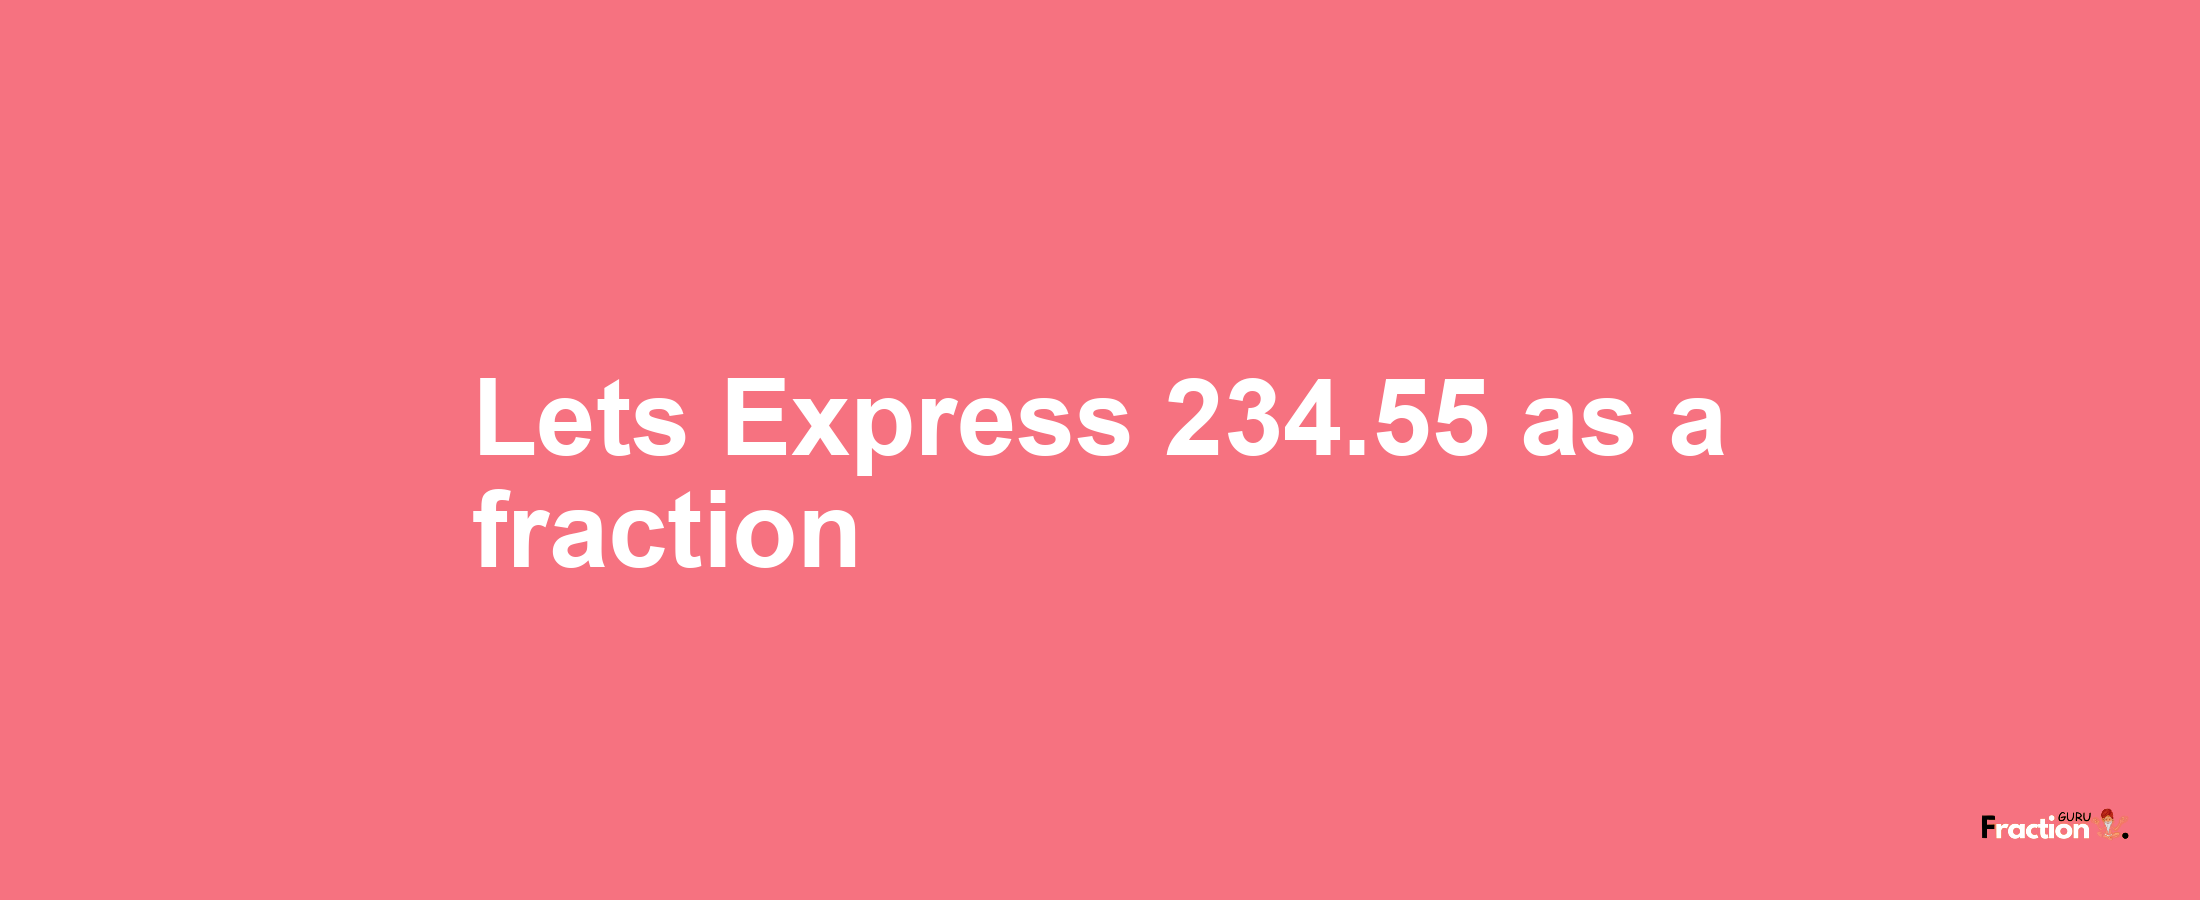 Lets Express 234.55 as afraction